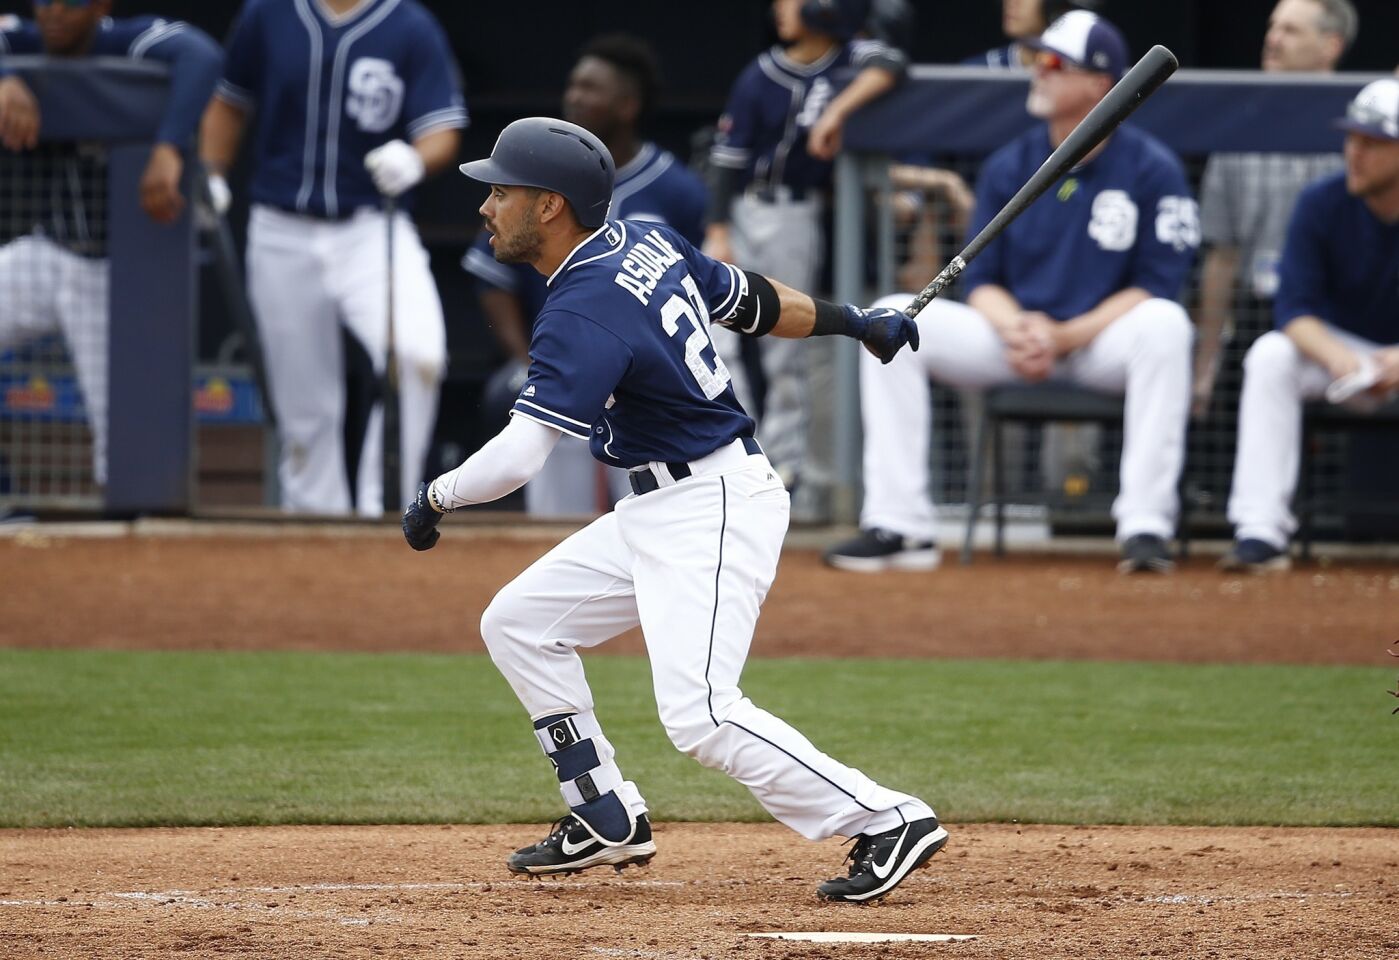 The 26-year-old Asuaje is tied with outfielder Jose Pirela for the team lead this spring with 14 hits, which includes six extra-base hits (two homers, two triples and two doubles. He is hitting .400/.421/.743 with 11 RBIs this spring.